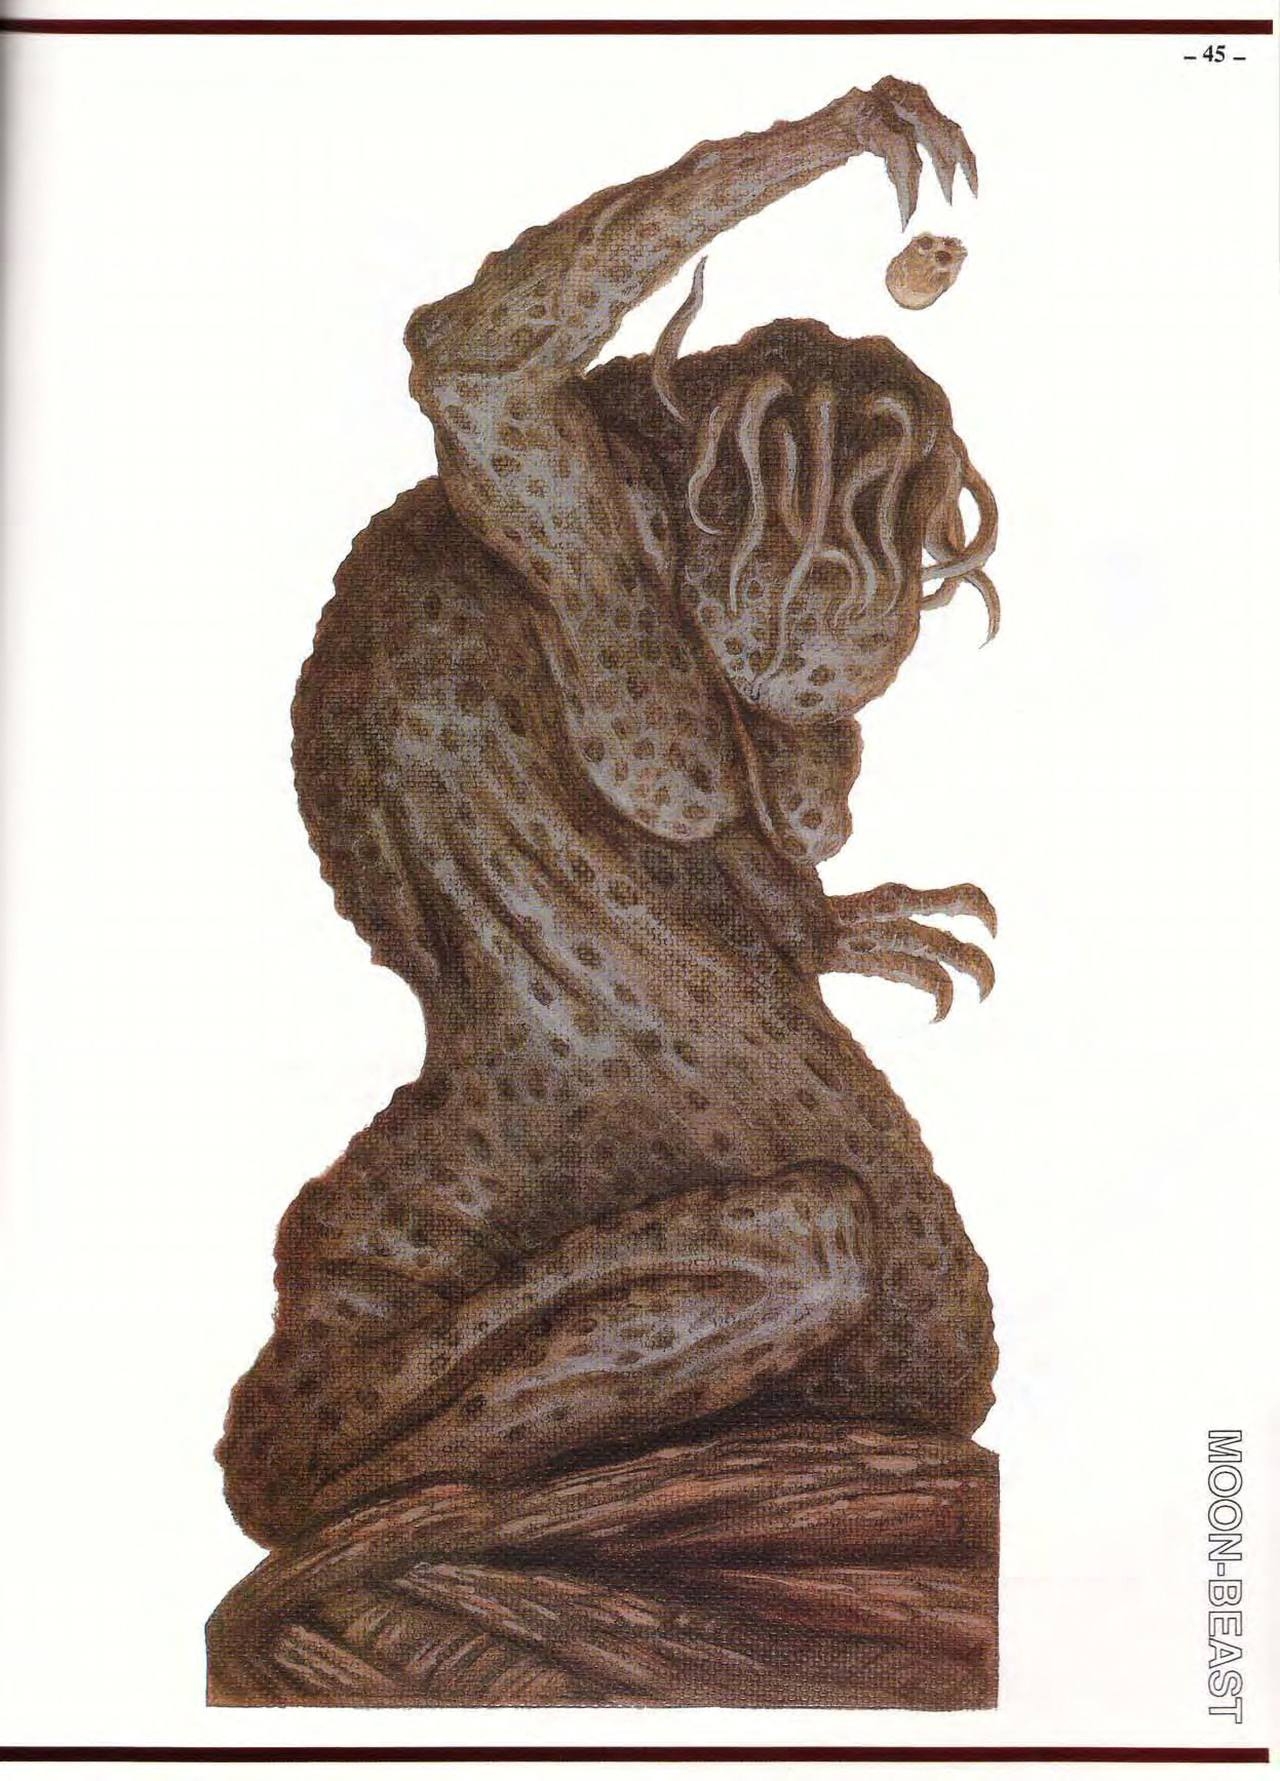 S. Petersen's Field Guide to Cthulhu Monsters 44